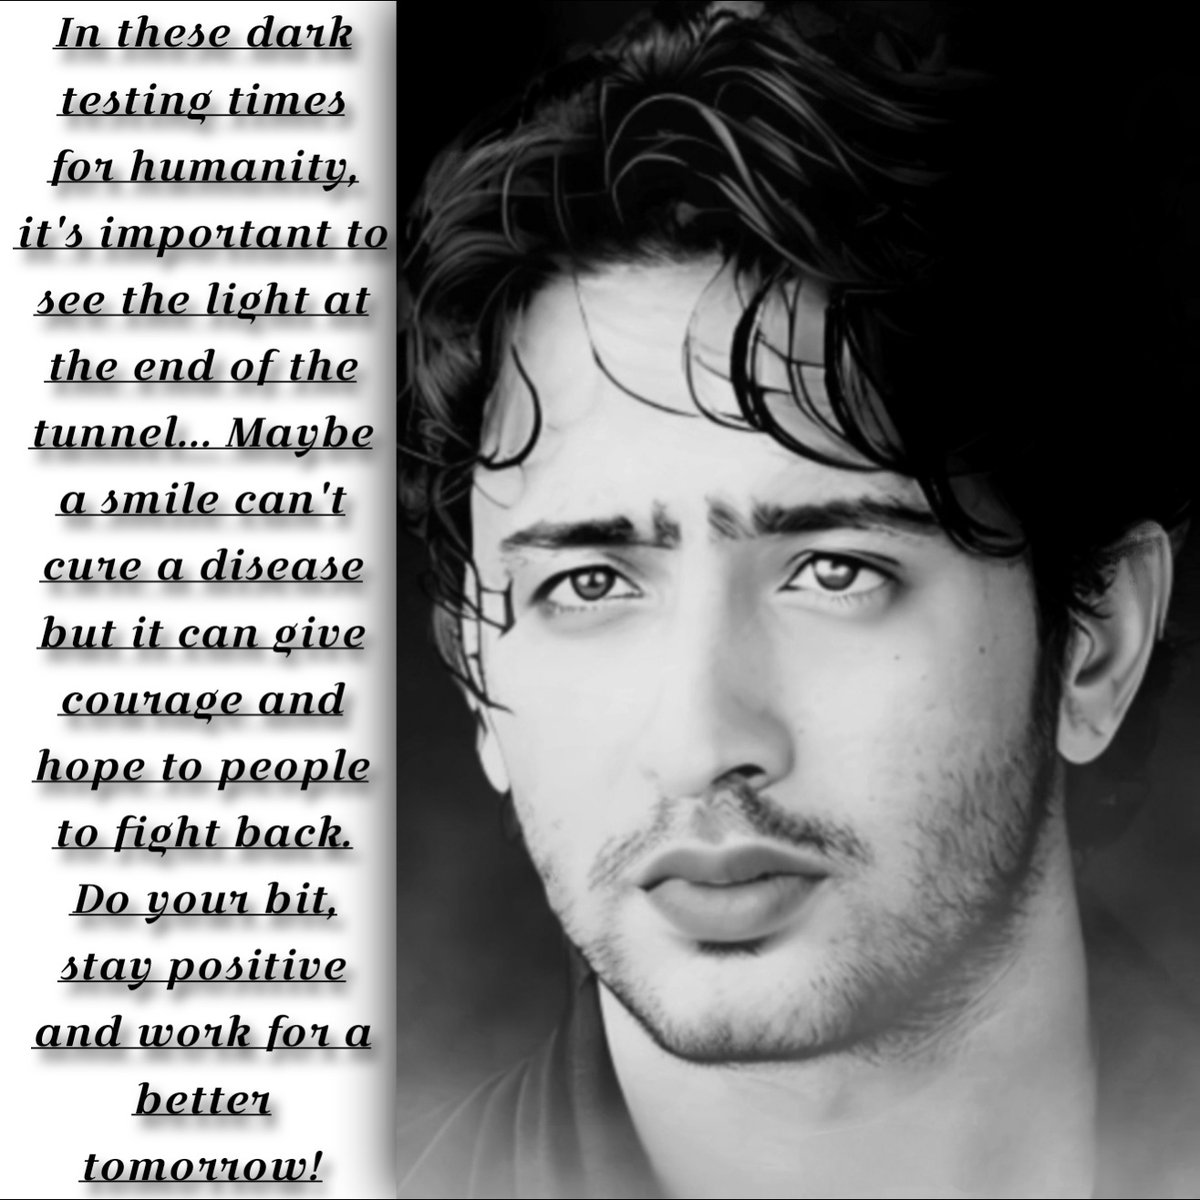 In These Dark Testing Times For Humanity It's Imp. To See The Light At The End Of The Tunnel... Do Your Bit, Stay Positive &Work For A Better 2morrow! @Shaheer_S 💫

#SSQuotes #ShaheerSayings #RiseNShine #StayHealthy #StayBlessed #Hope #LoveAndRespect

#GodBlessYou #ShaheerSheikh